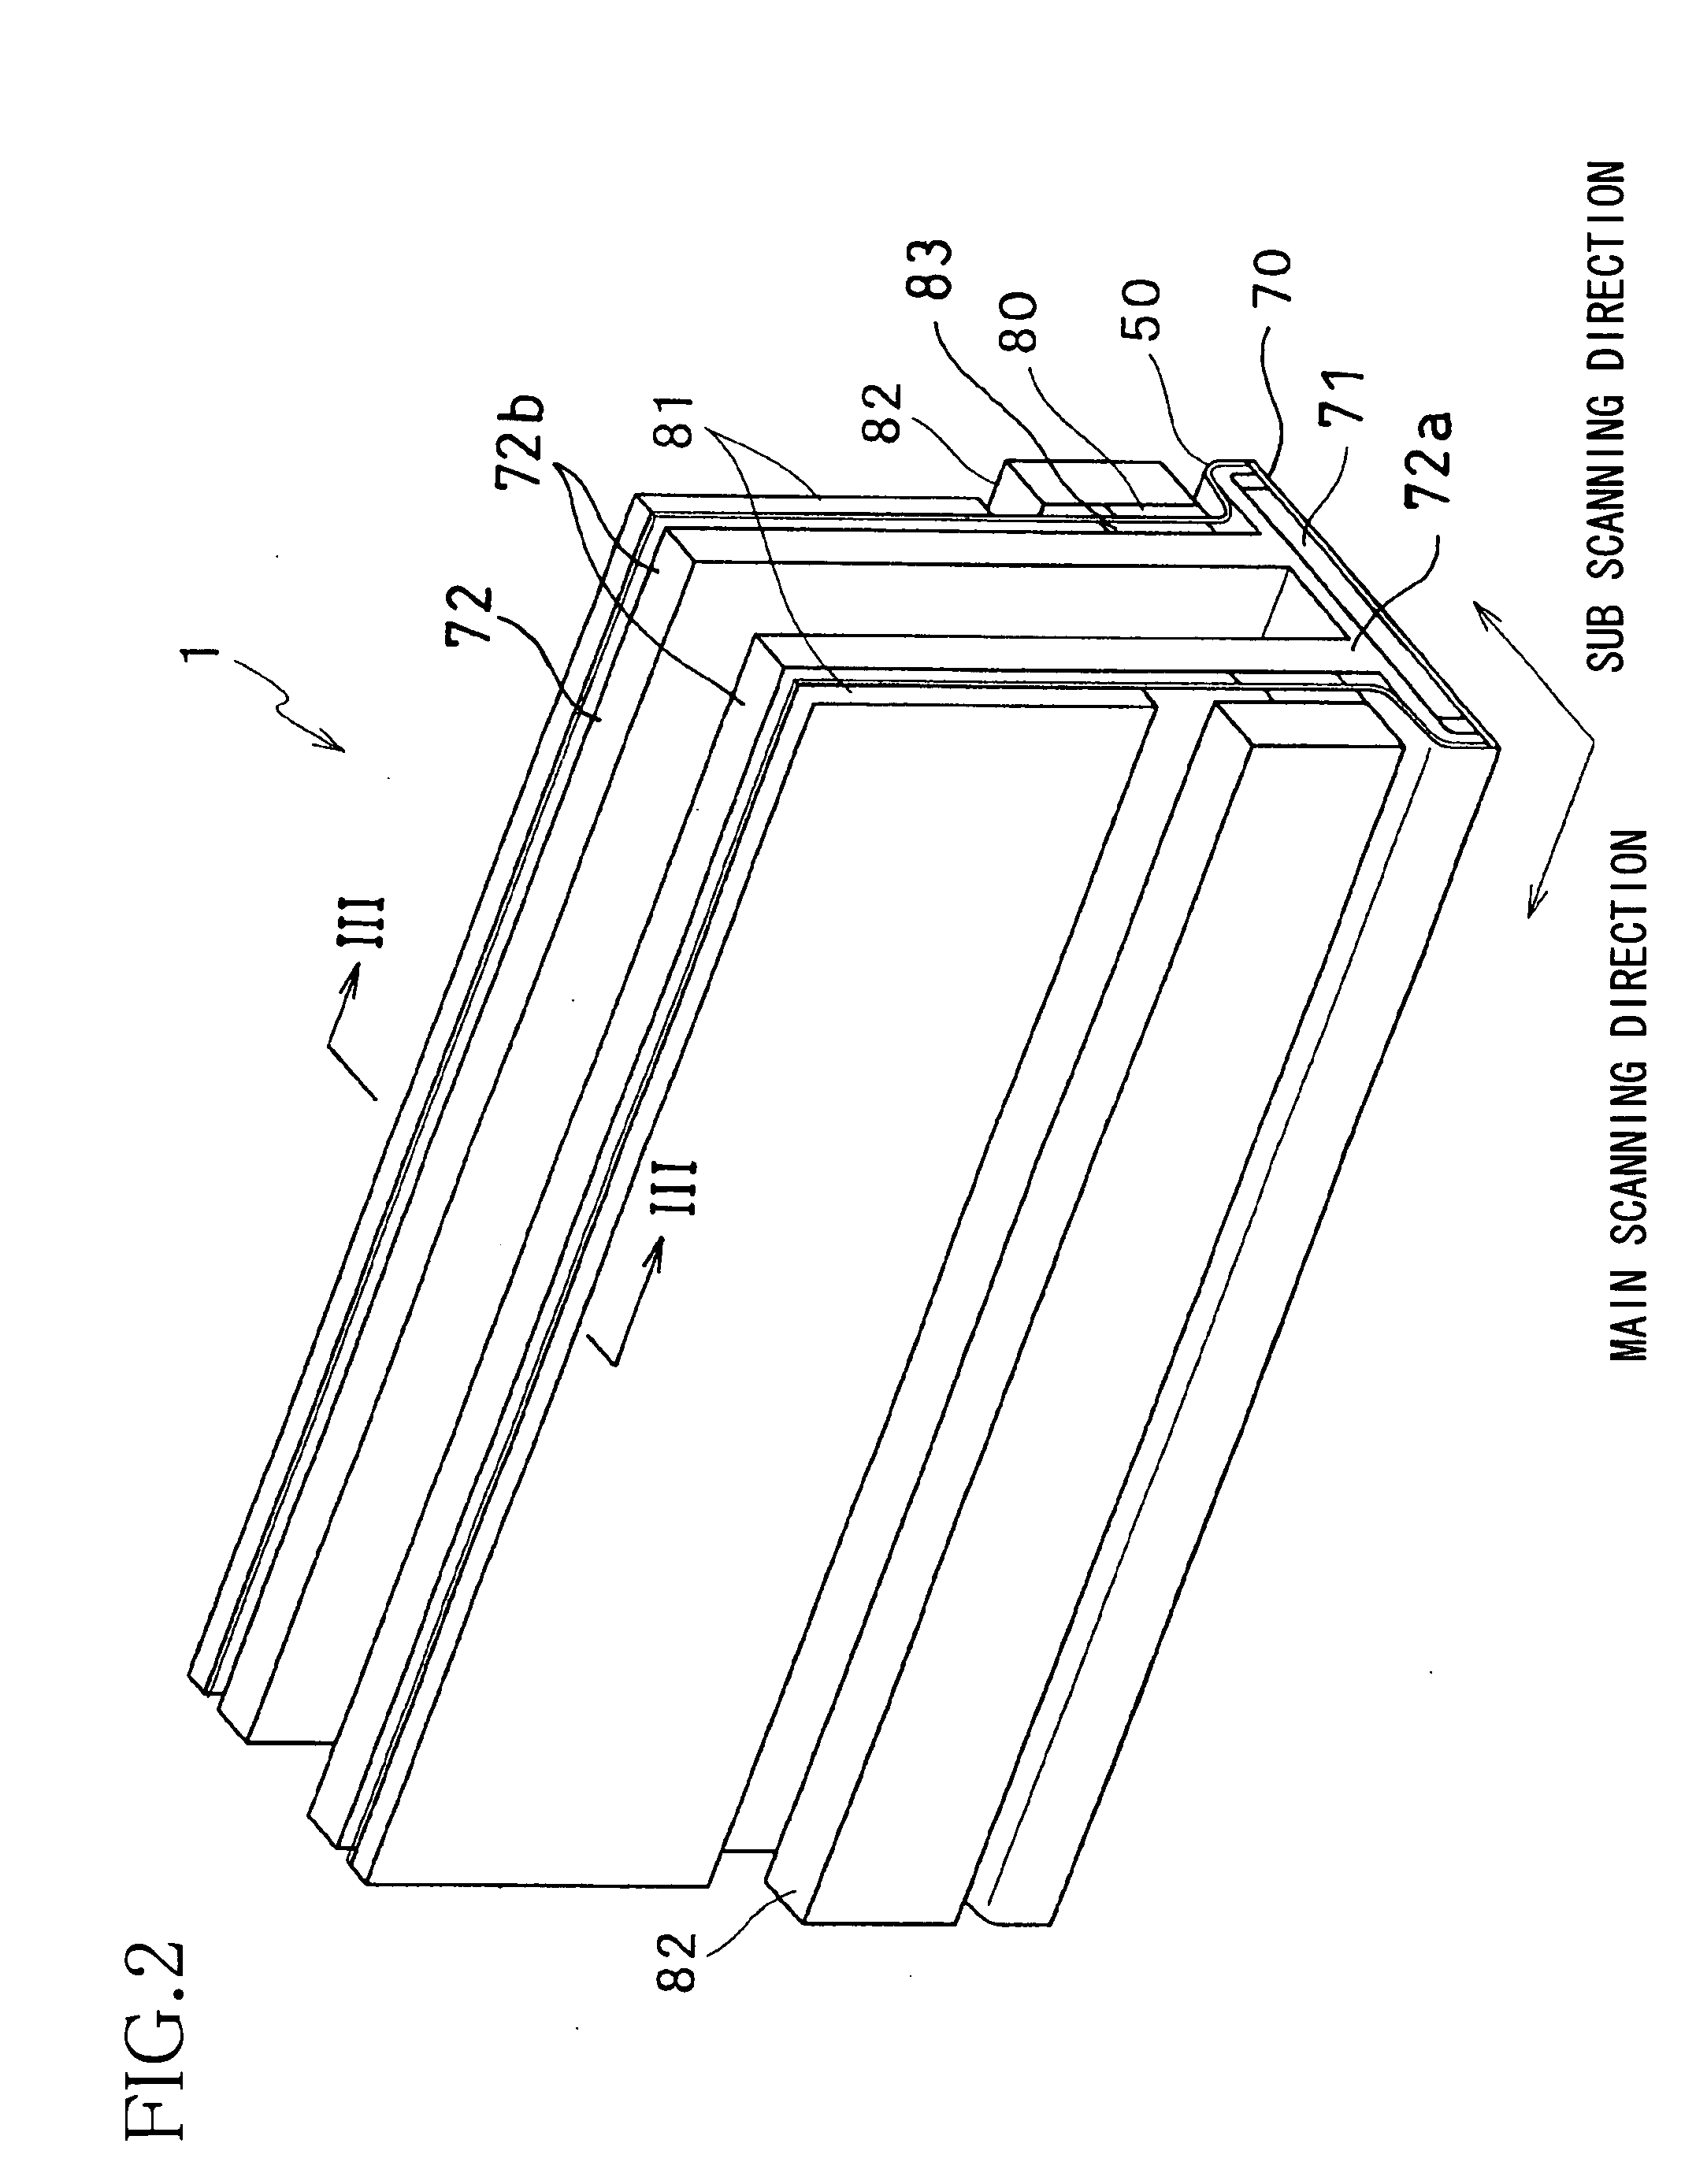 Method for manufacturing a printed circuit board that mounts an integrated circuit device thereon and the printed circuit board